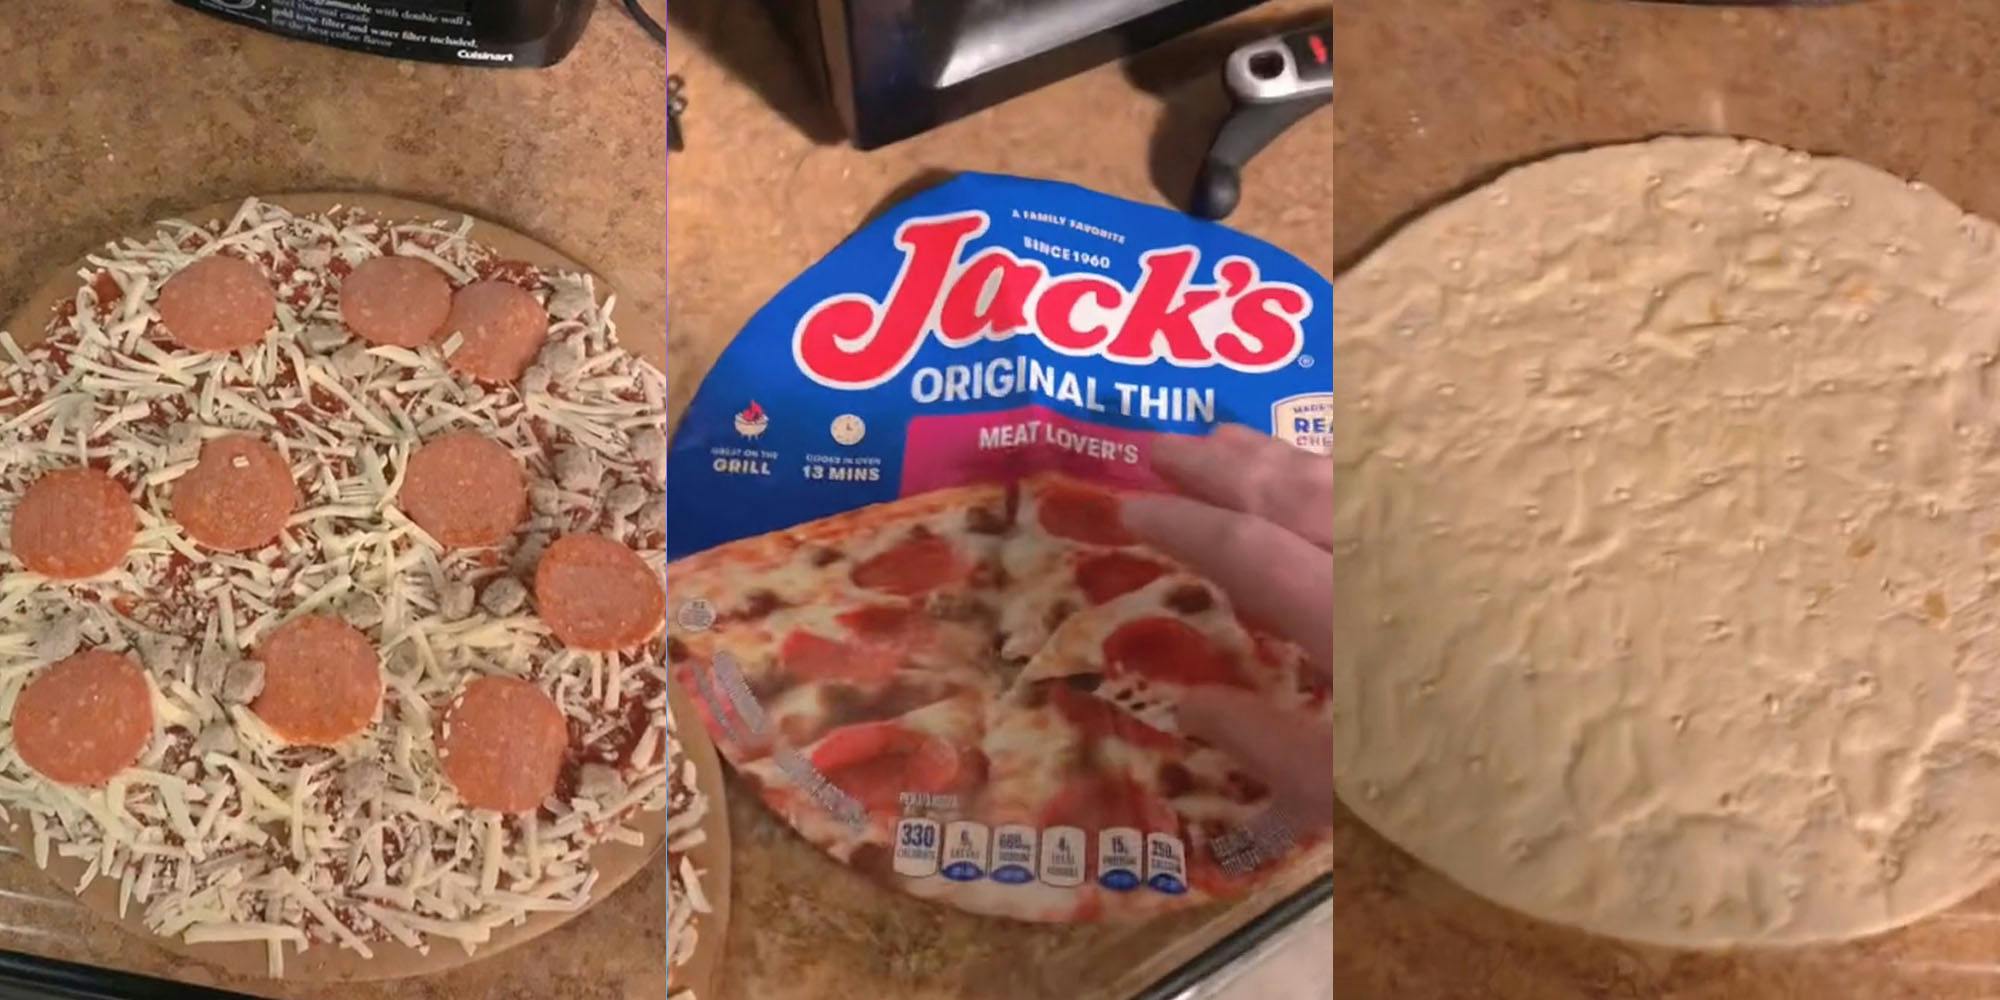 pizza toppings on cardboard on counter (l) Jack's original thin meat lover's pizza packaging on counter (c) pizza dough on counter (r)